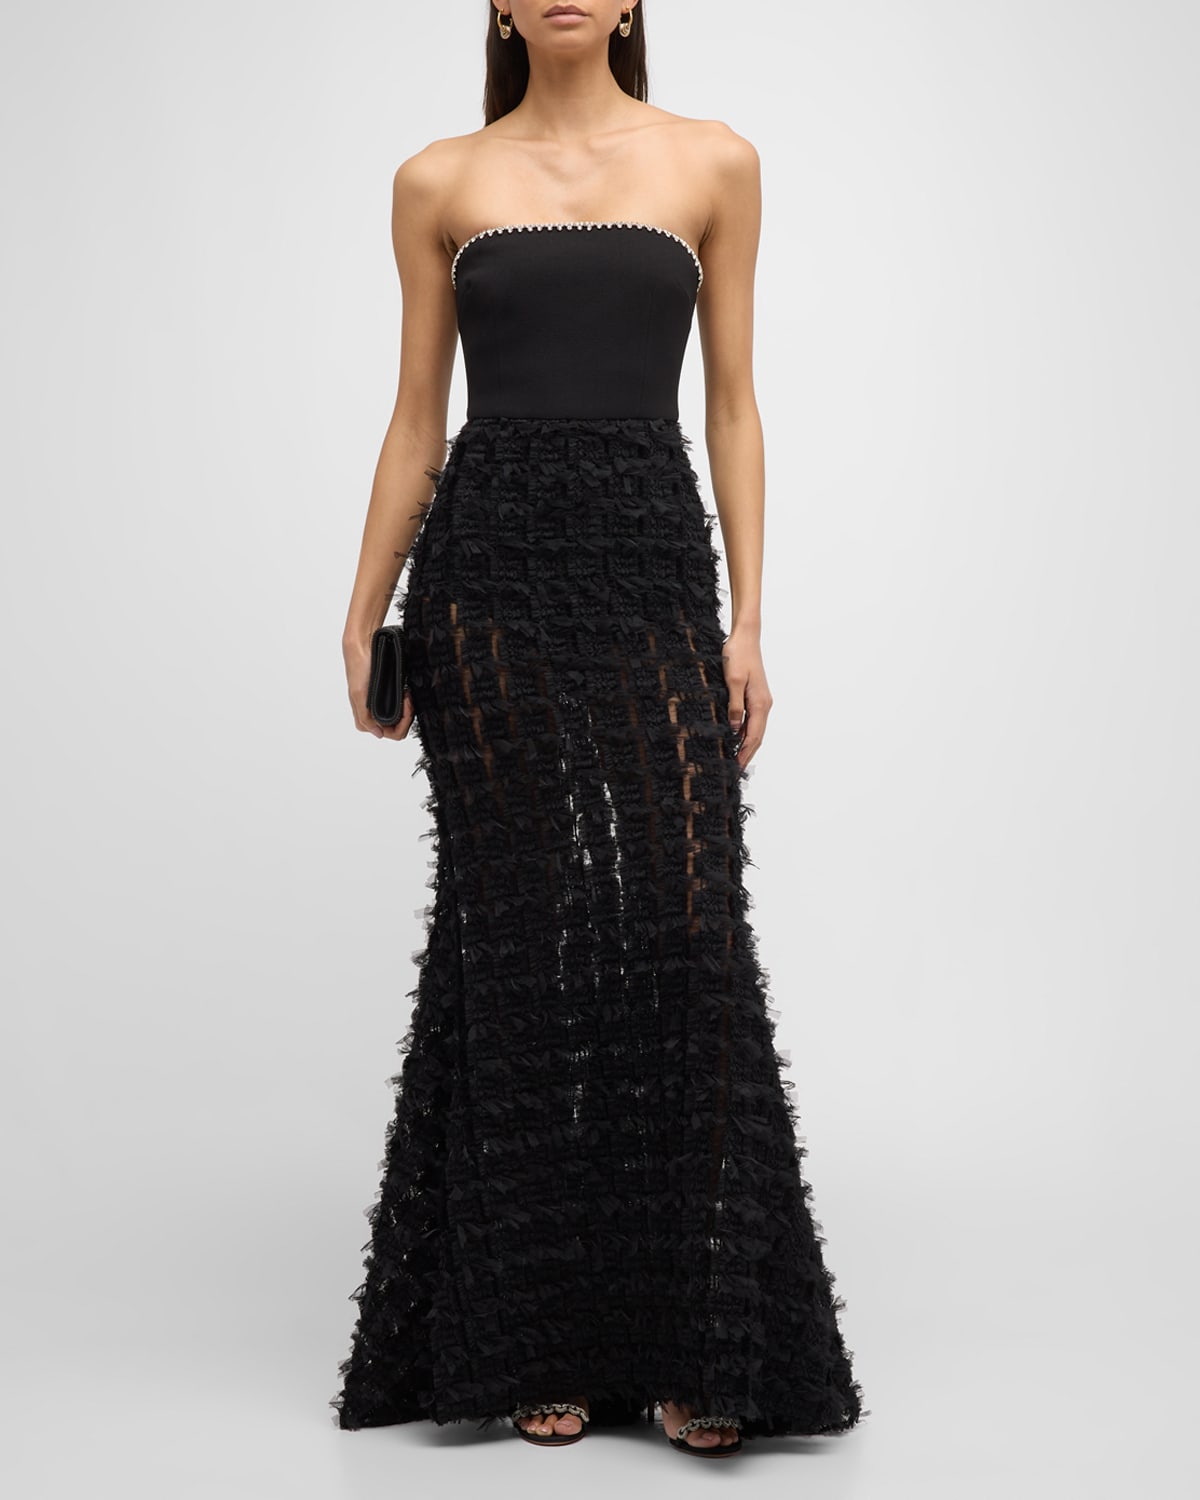 Cherie Amour Strapless Crystal-Embellished Gown